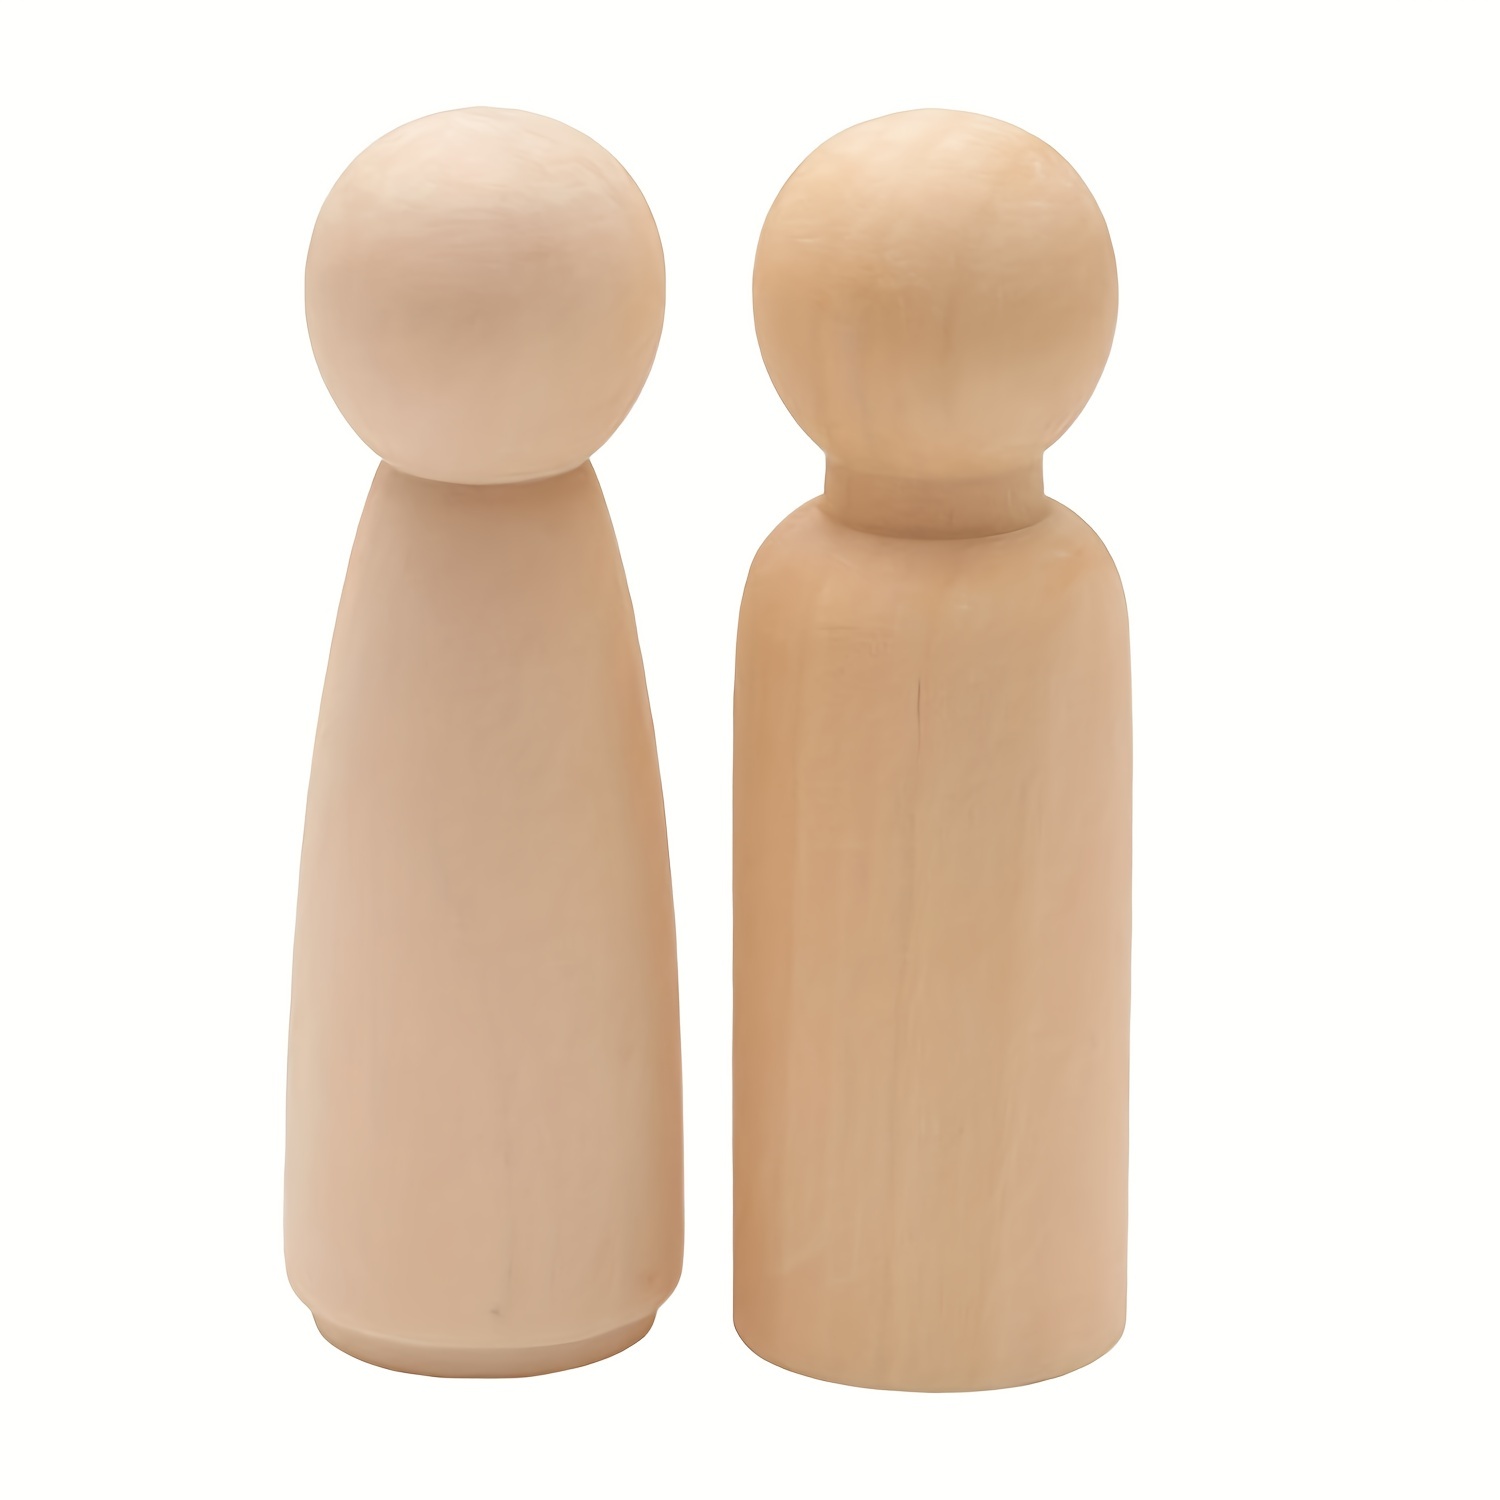 60pcs Peg Dolls Decorative Wooden Peg Doll Assorted Sizes Unfinishied Peg  People Doll Bodies Wooden Figures for Painting Craft Art Projects Peg Game